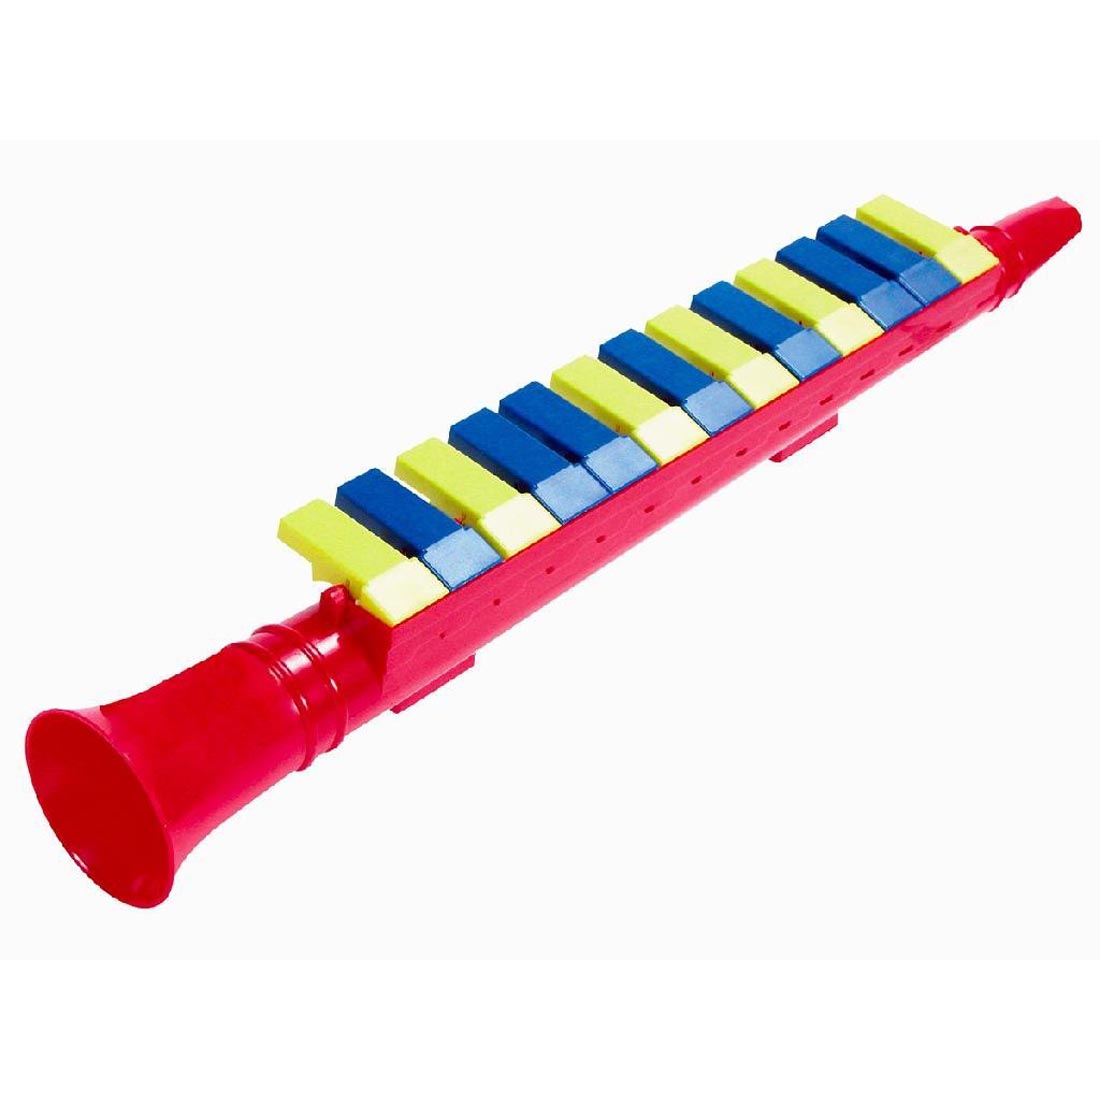 Piano Horn Musical Toy